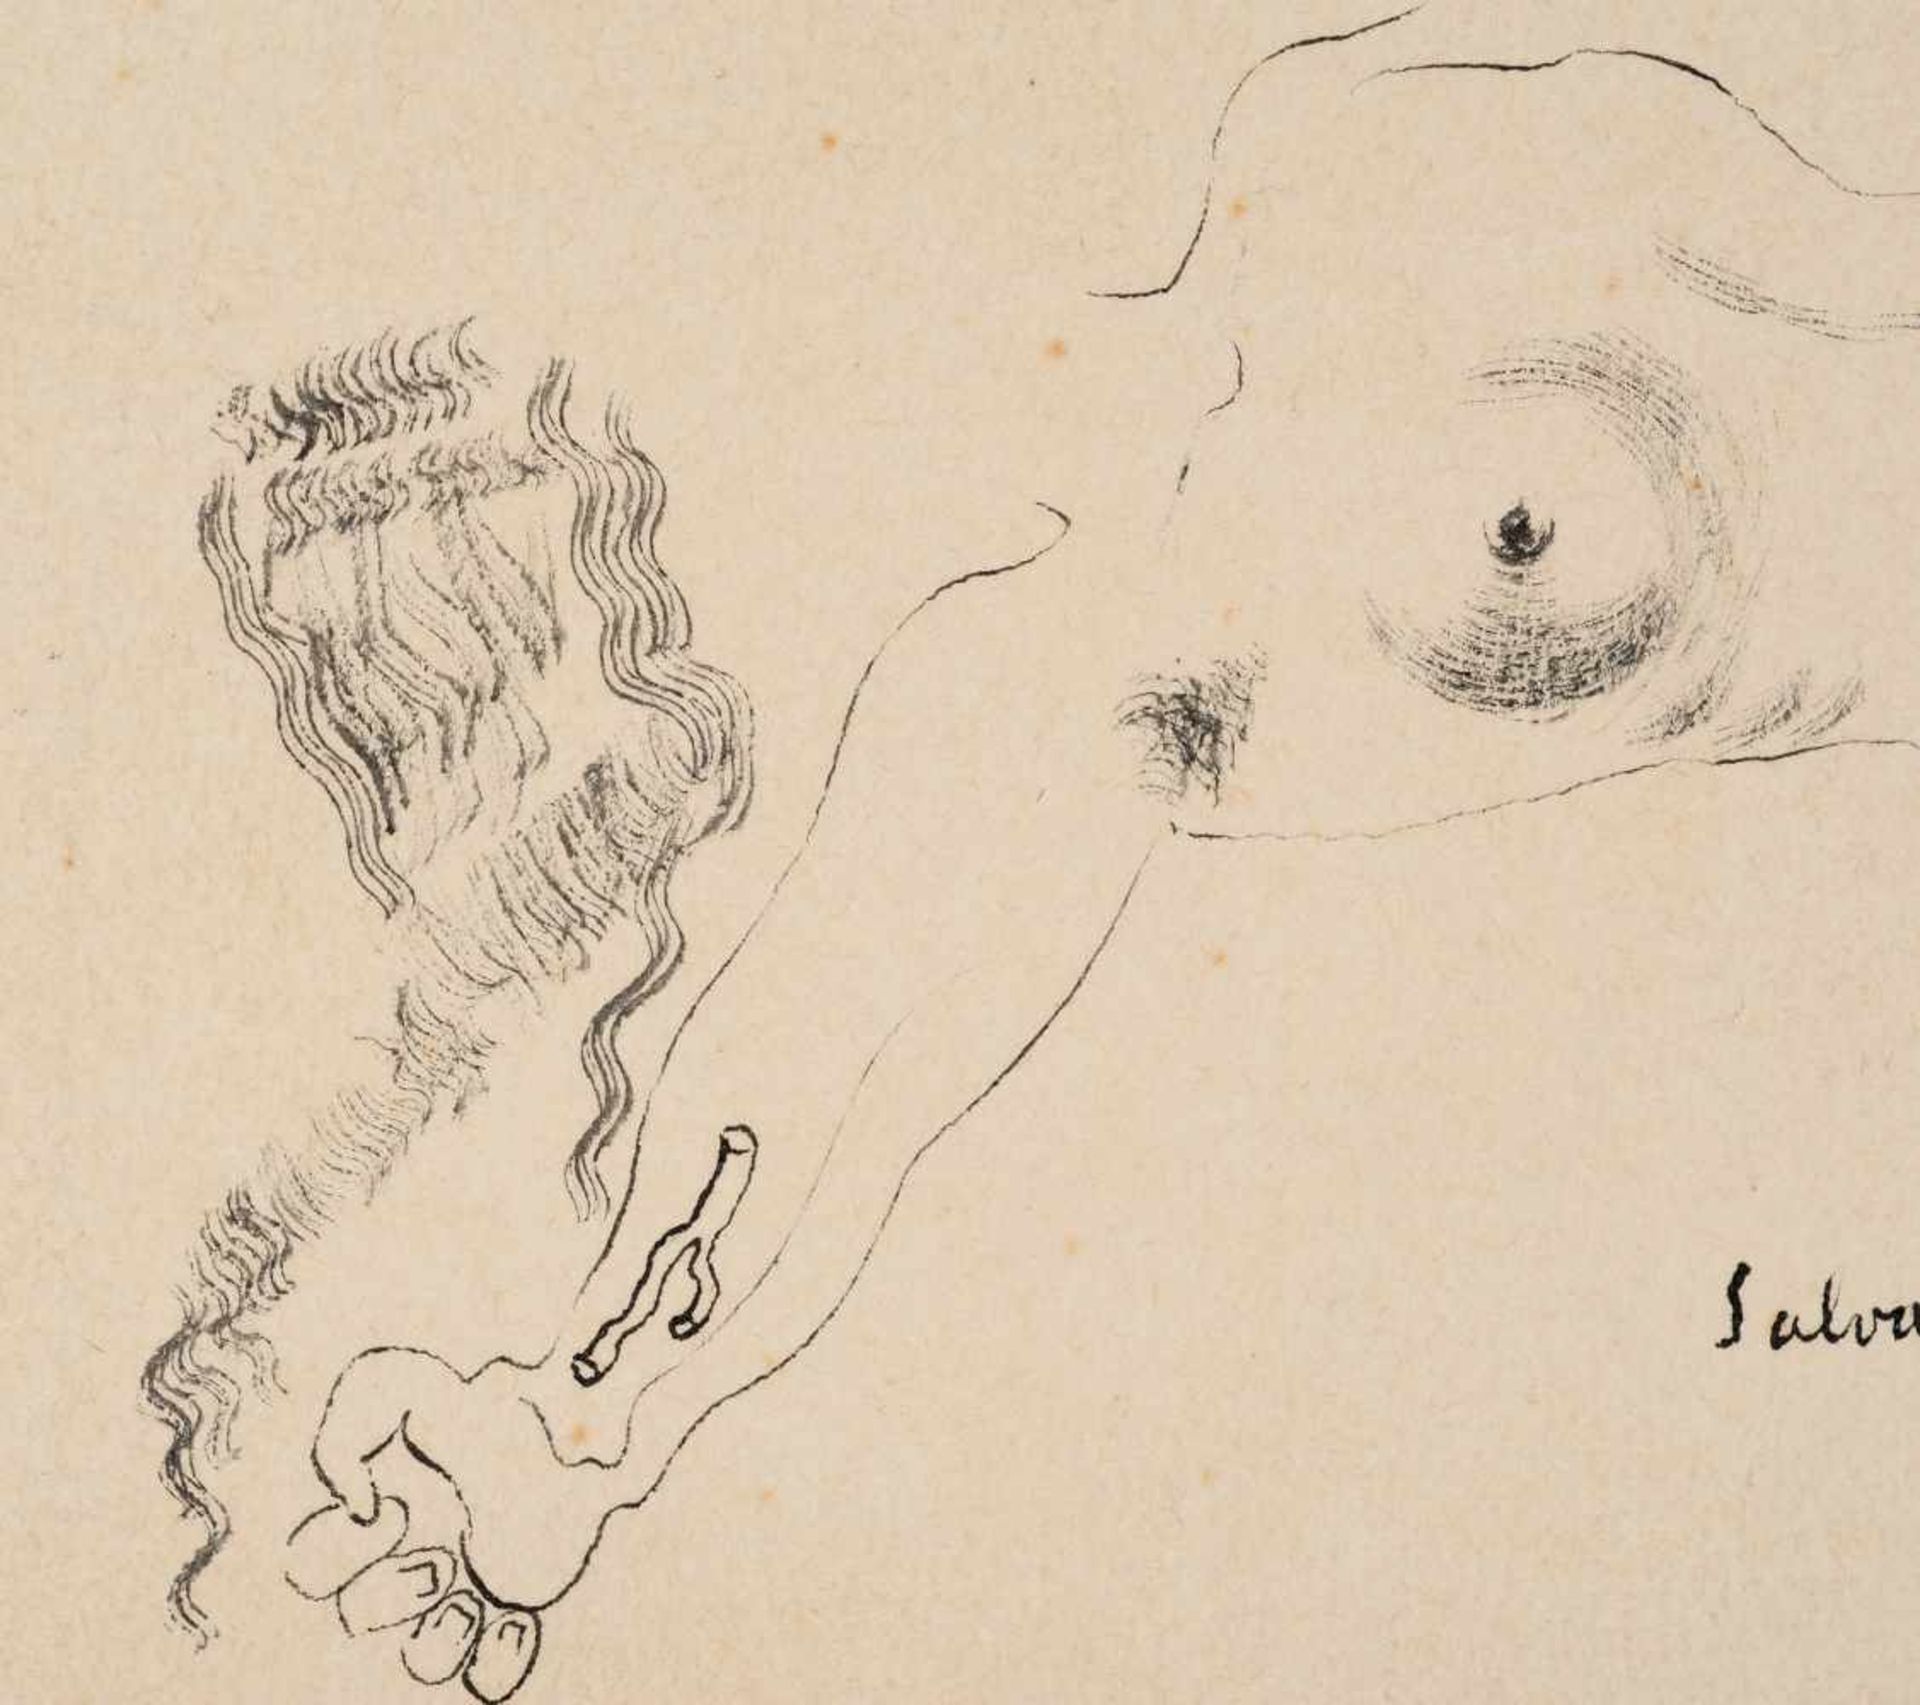 Salvador Dalí (Figueres, 1904 - 1989) Ink drawing on paper. Signed and dated in 1927. This is a - Bild 2 aus 4